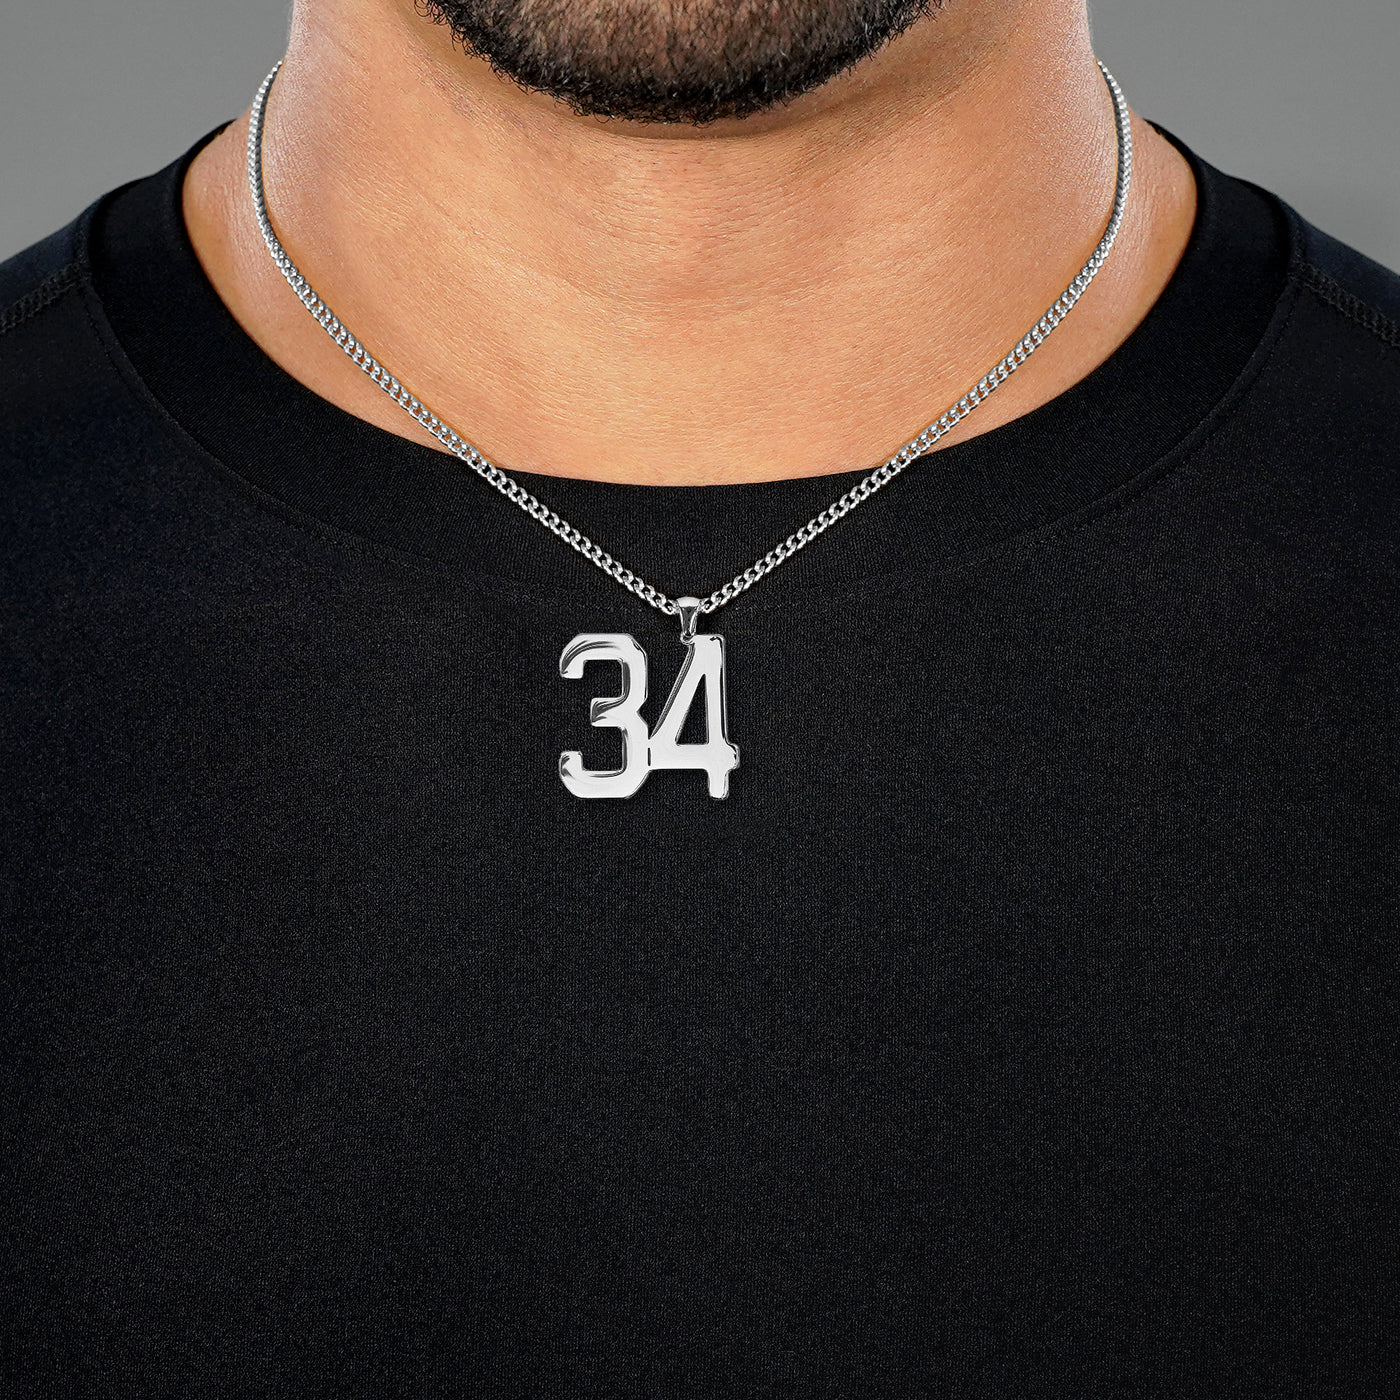 34 Number Pendant with Chain Necklace - Stainless Steel